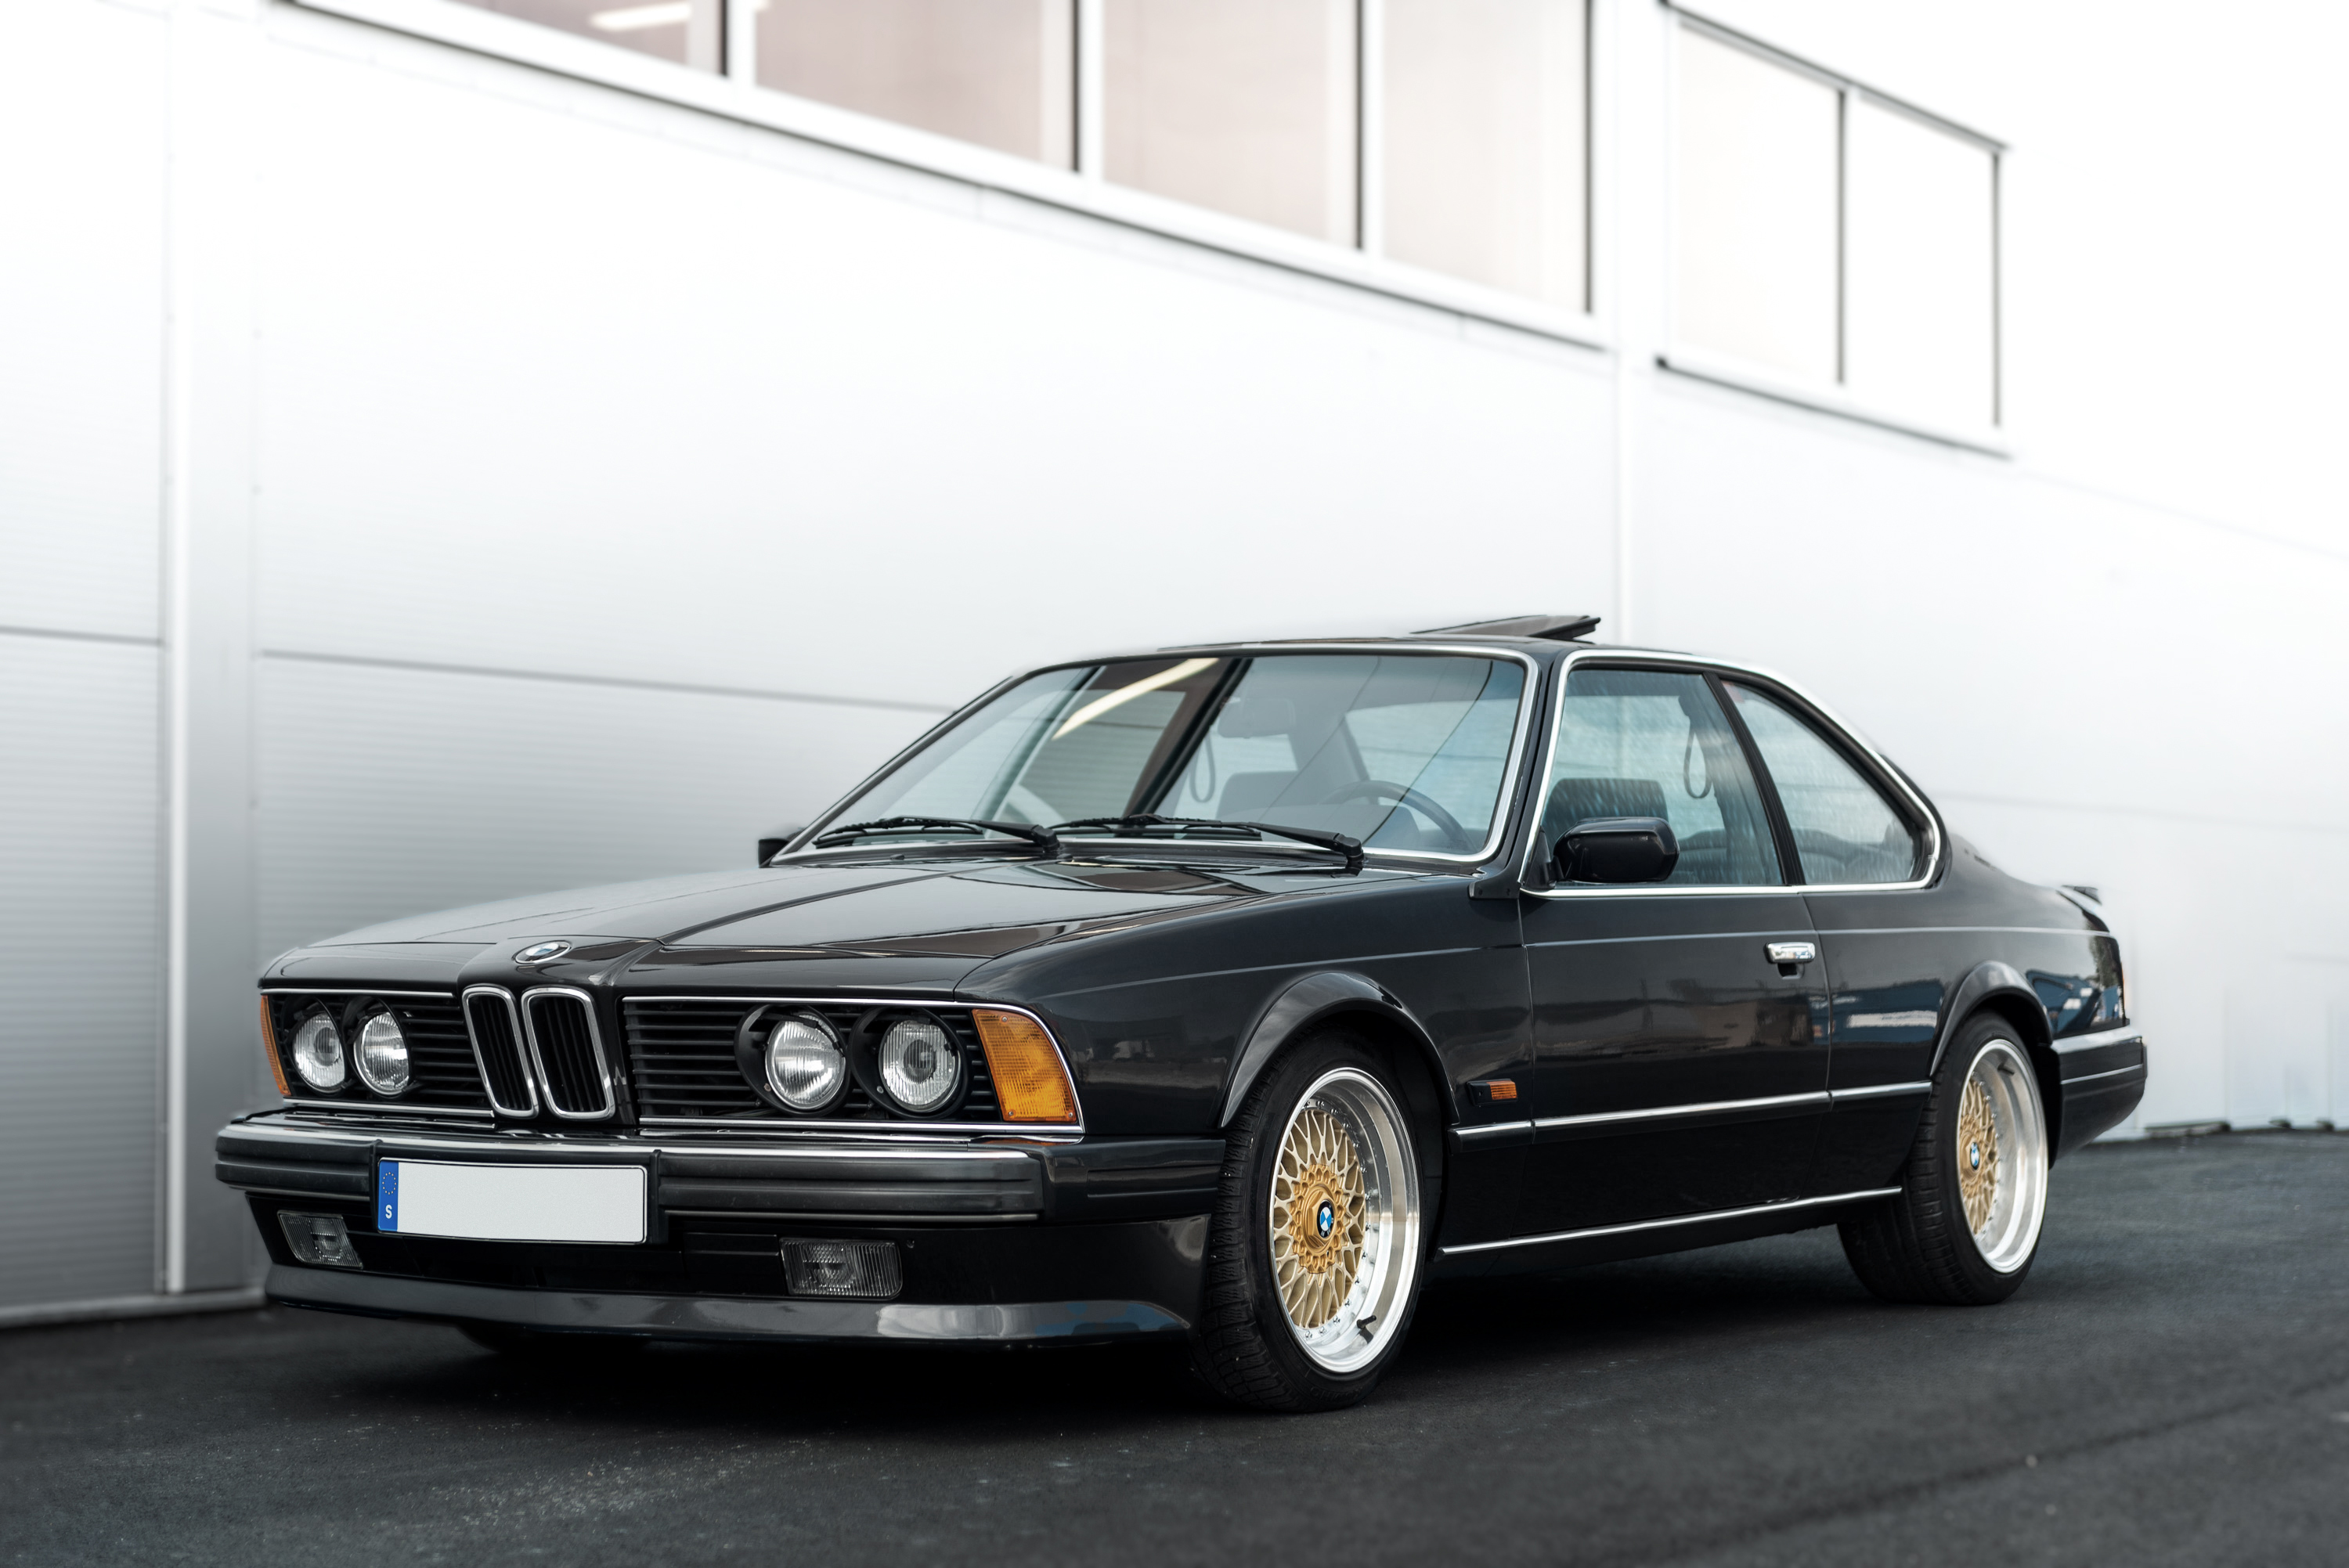 1988 BMW (E24) 635 CSI for sale by auction in Kungälv